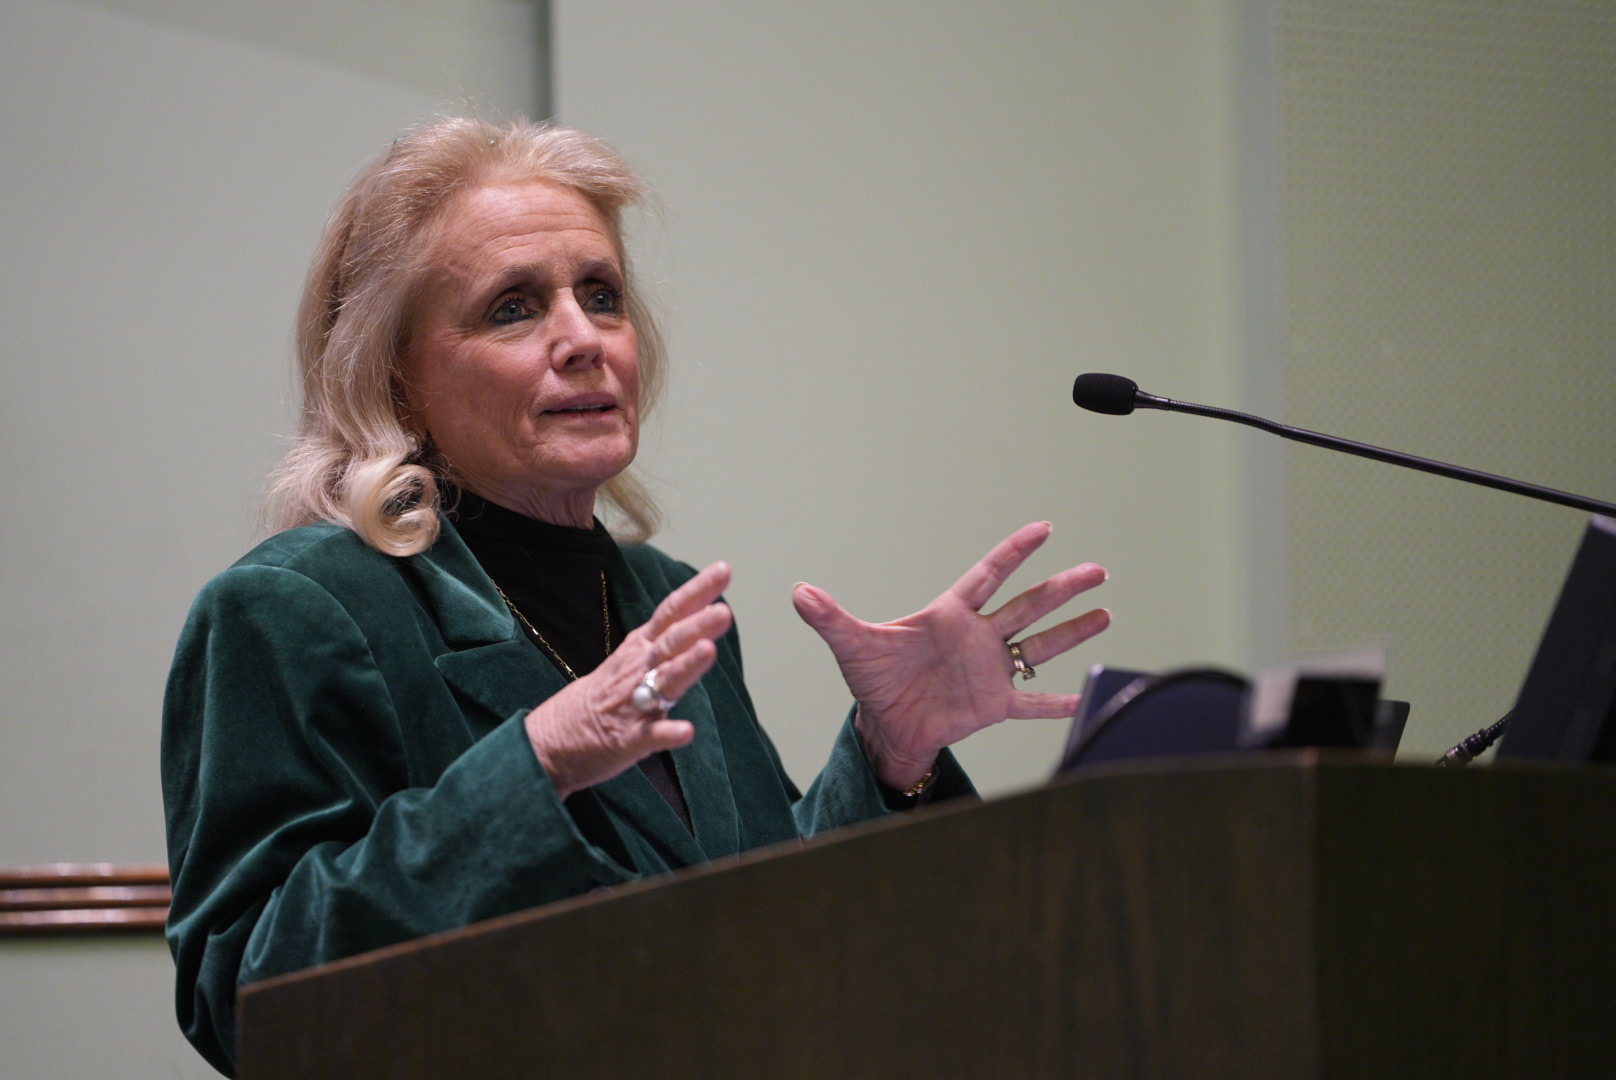 U.S. Representative Debbie Dingell was the keynote speaker at the Great Lakes Compact Symposium.